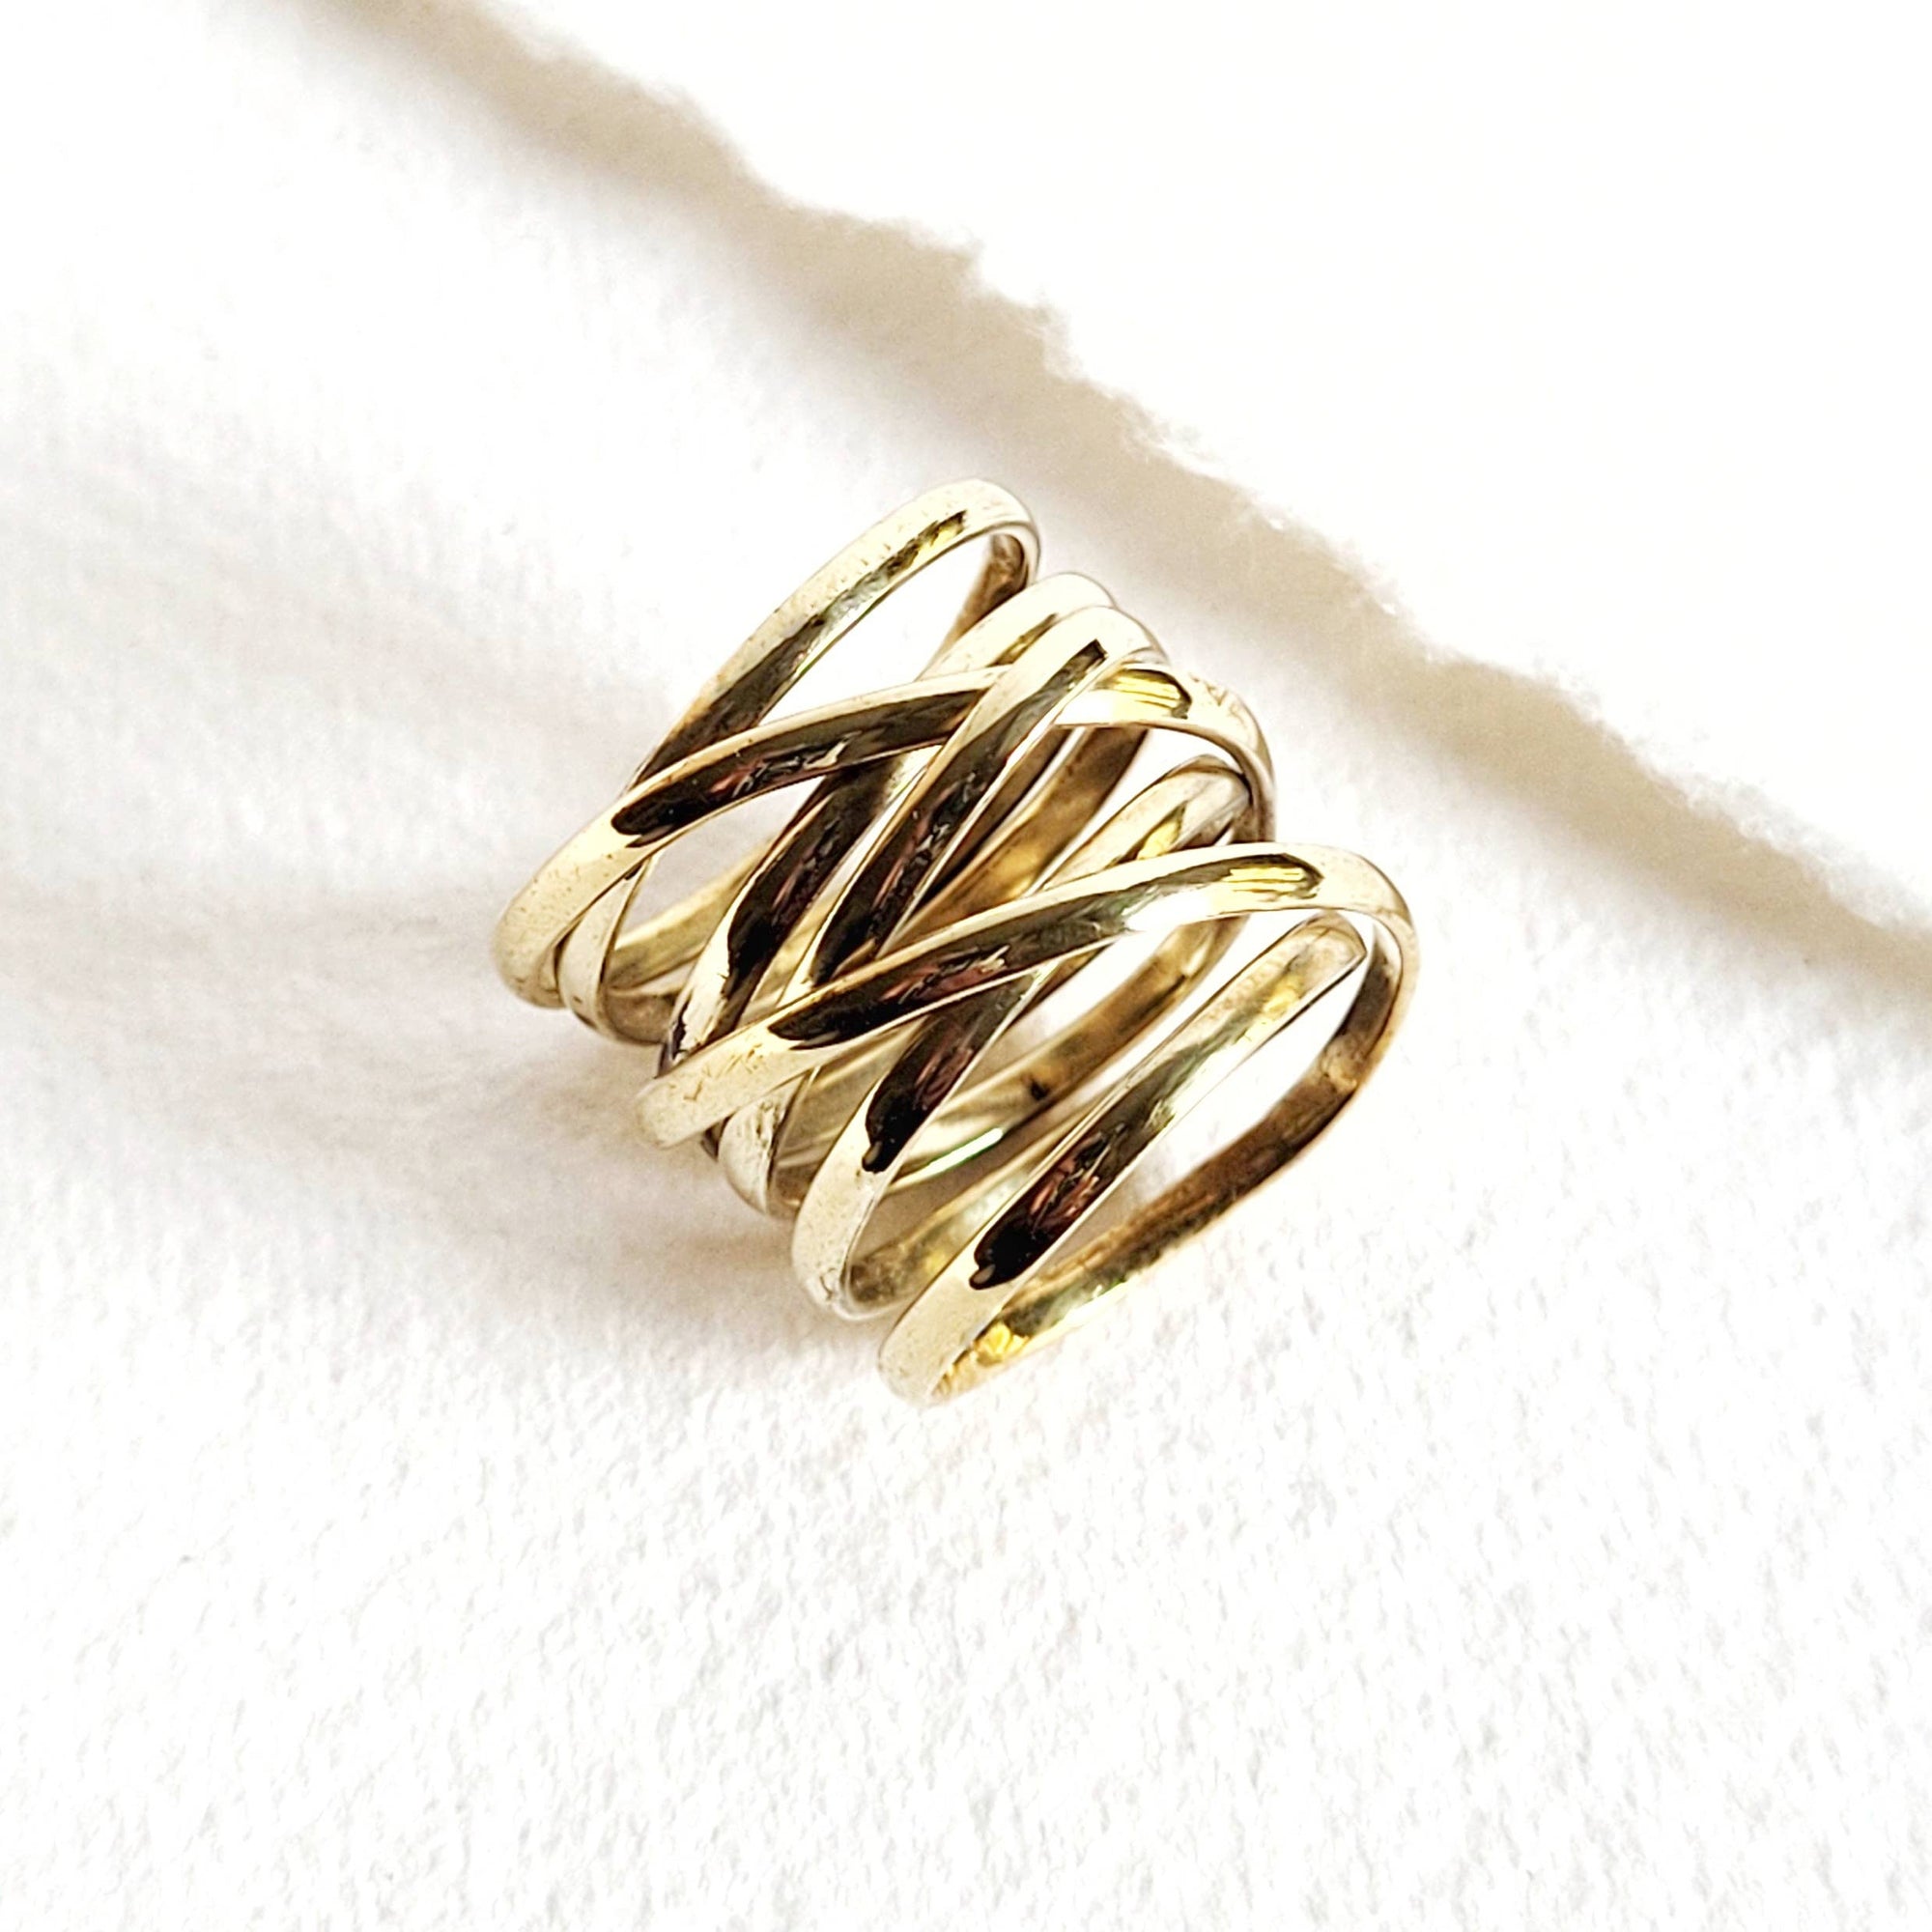 Brass Infinity layered all wrapped up band ring